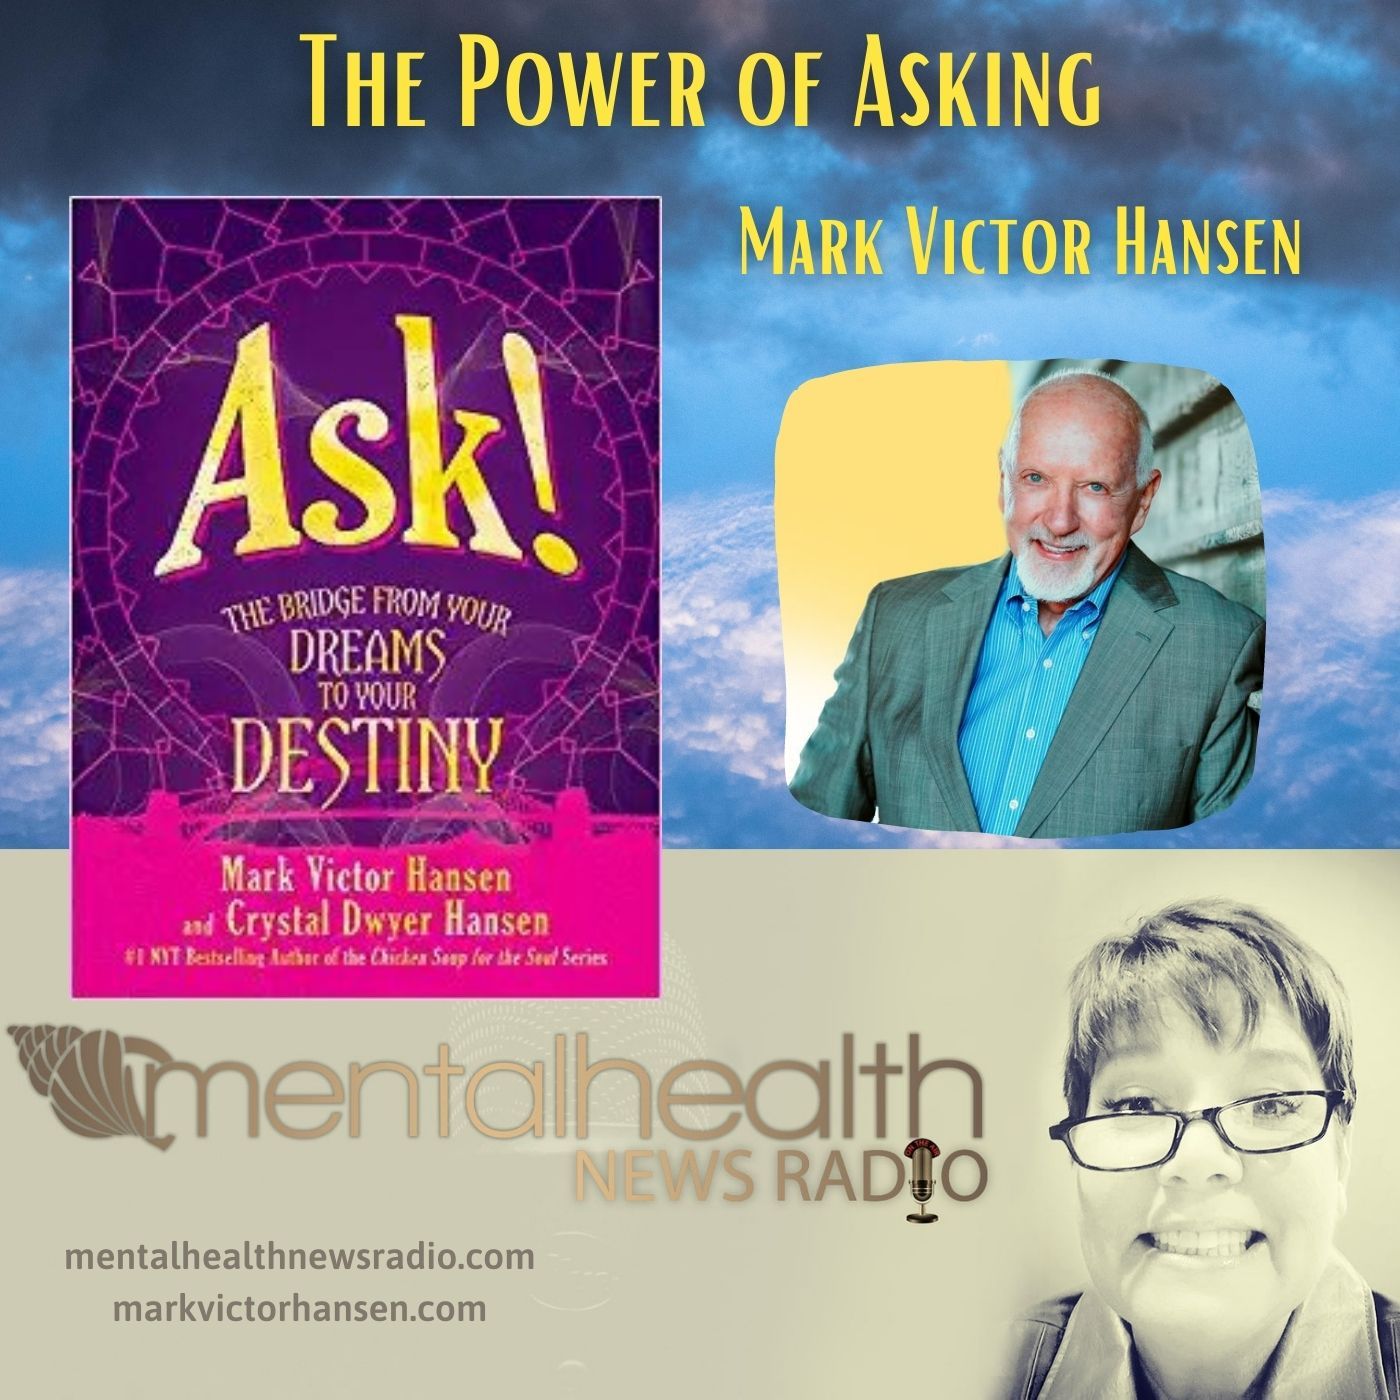 Mental Health News Radio - The Power of Asking with Mark Victor Hansen